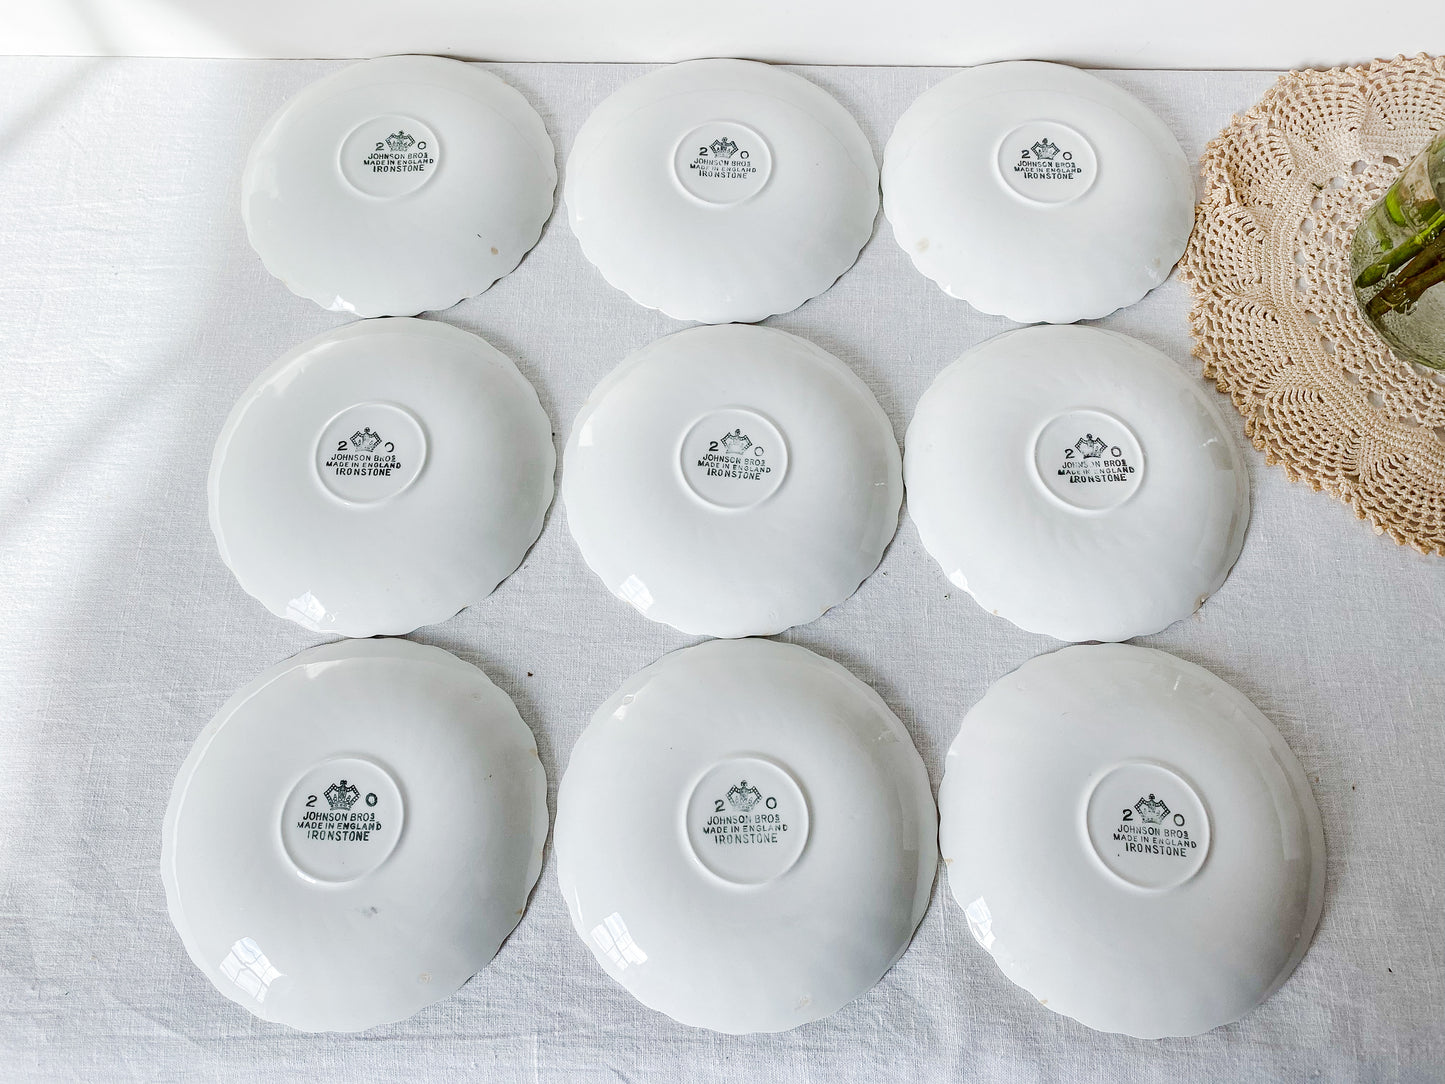 Set of 9 Vintage Crazed White Swirl Ironstone Teacup Saucers, Regency by Johnson Brothers